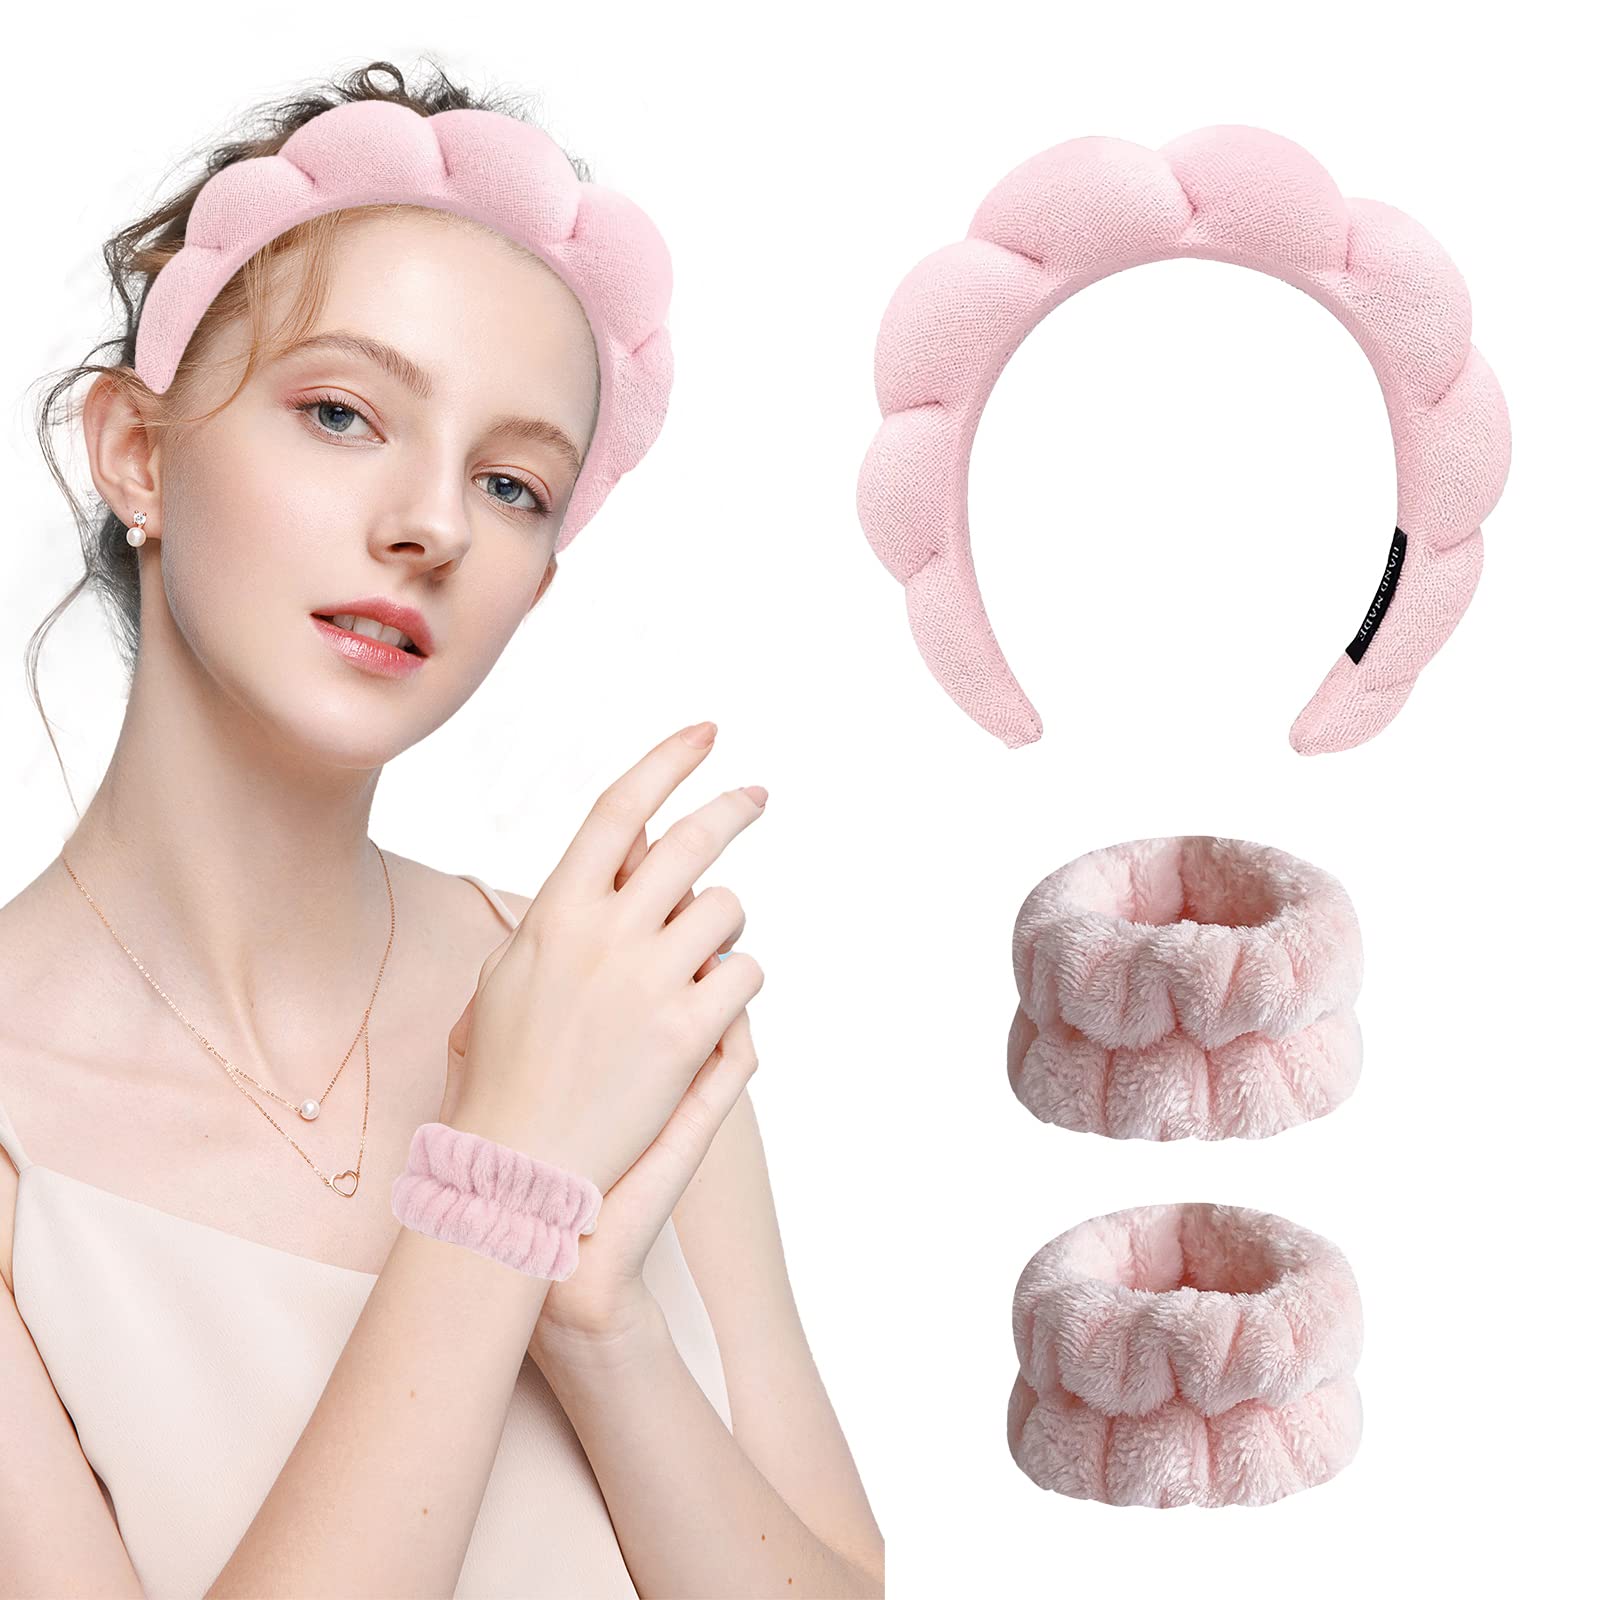 Yohou 3 Pack Spa Makeup Headband for Washing Face with Wristband